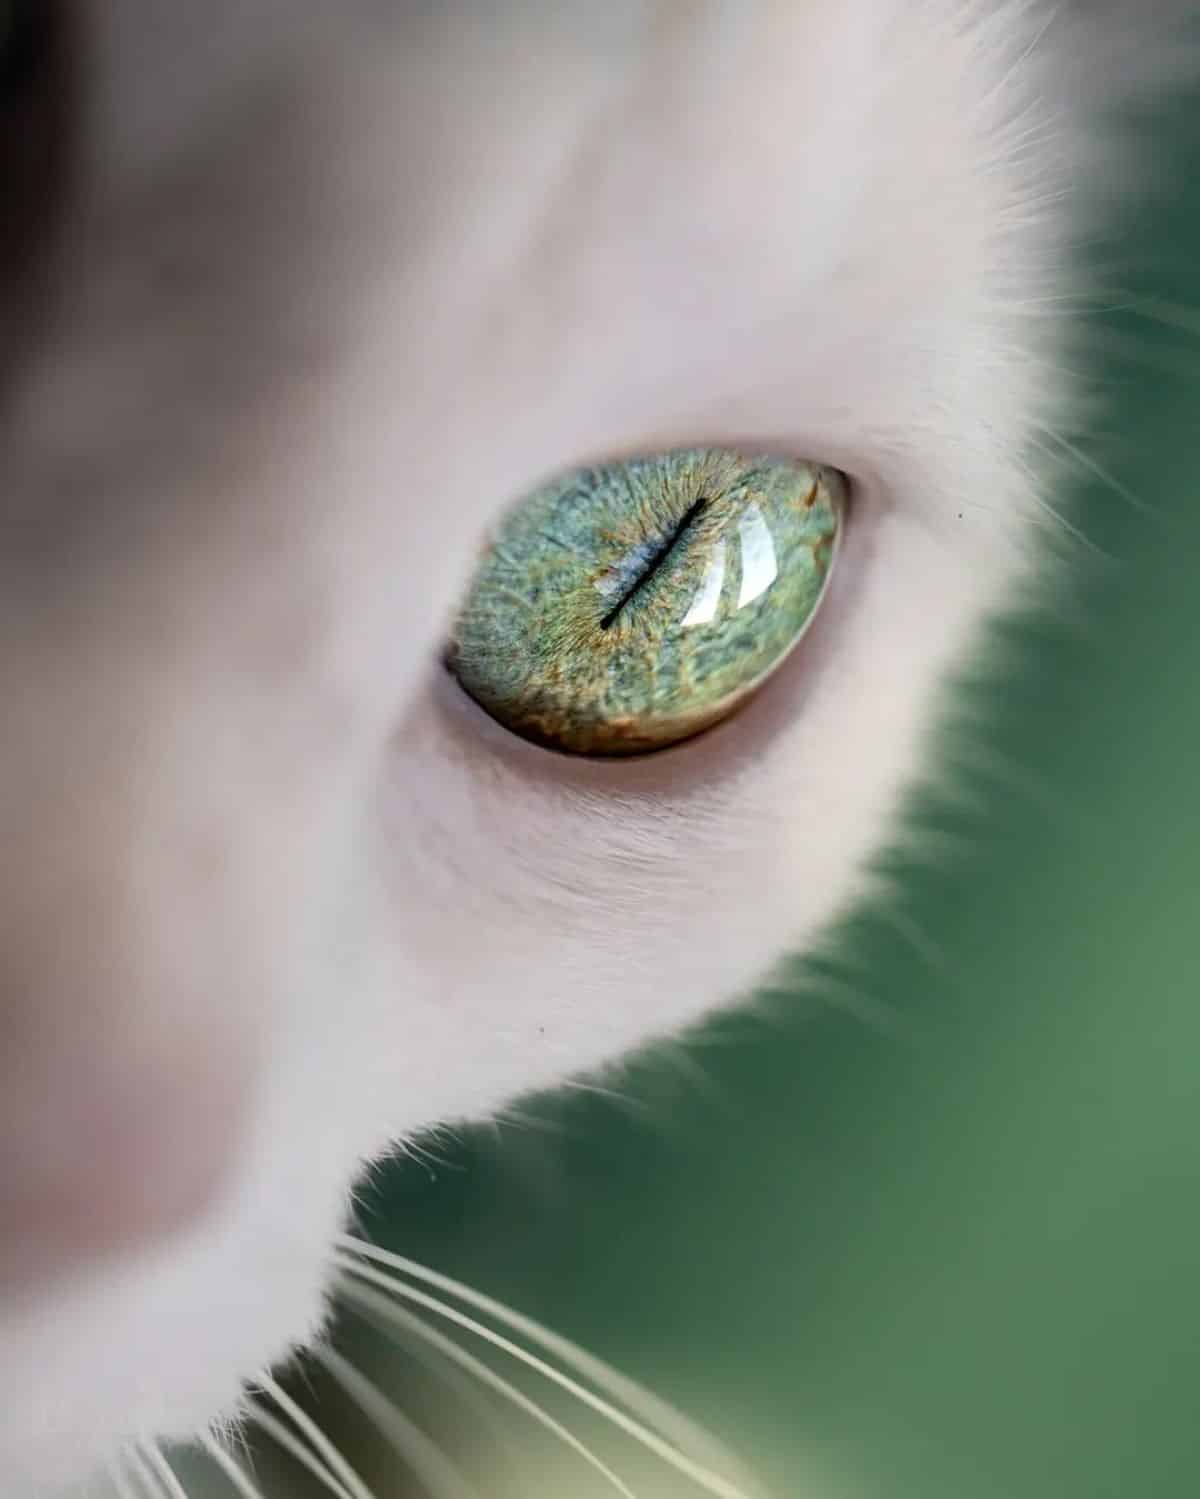 A close-up of a white cat eye.